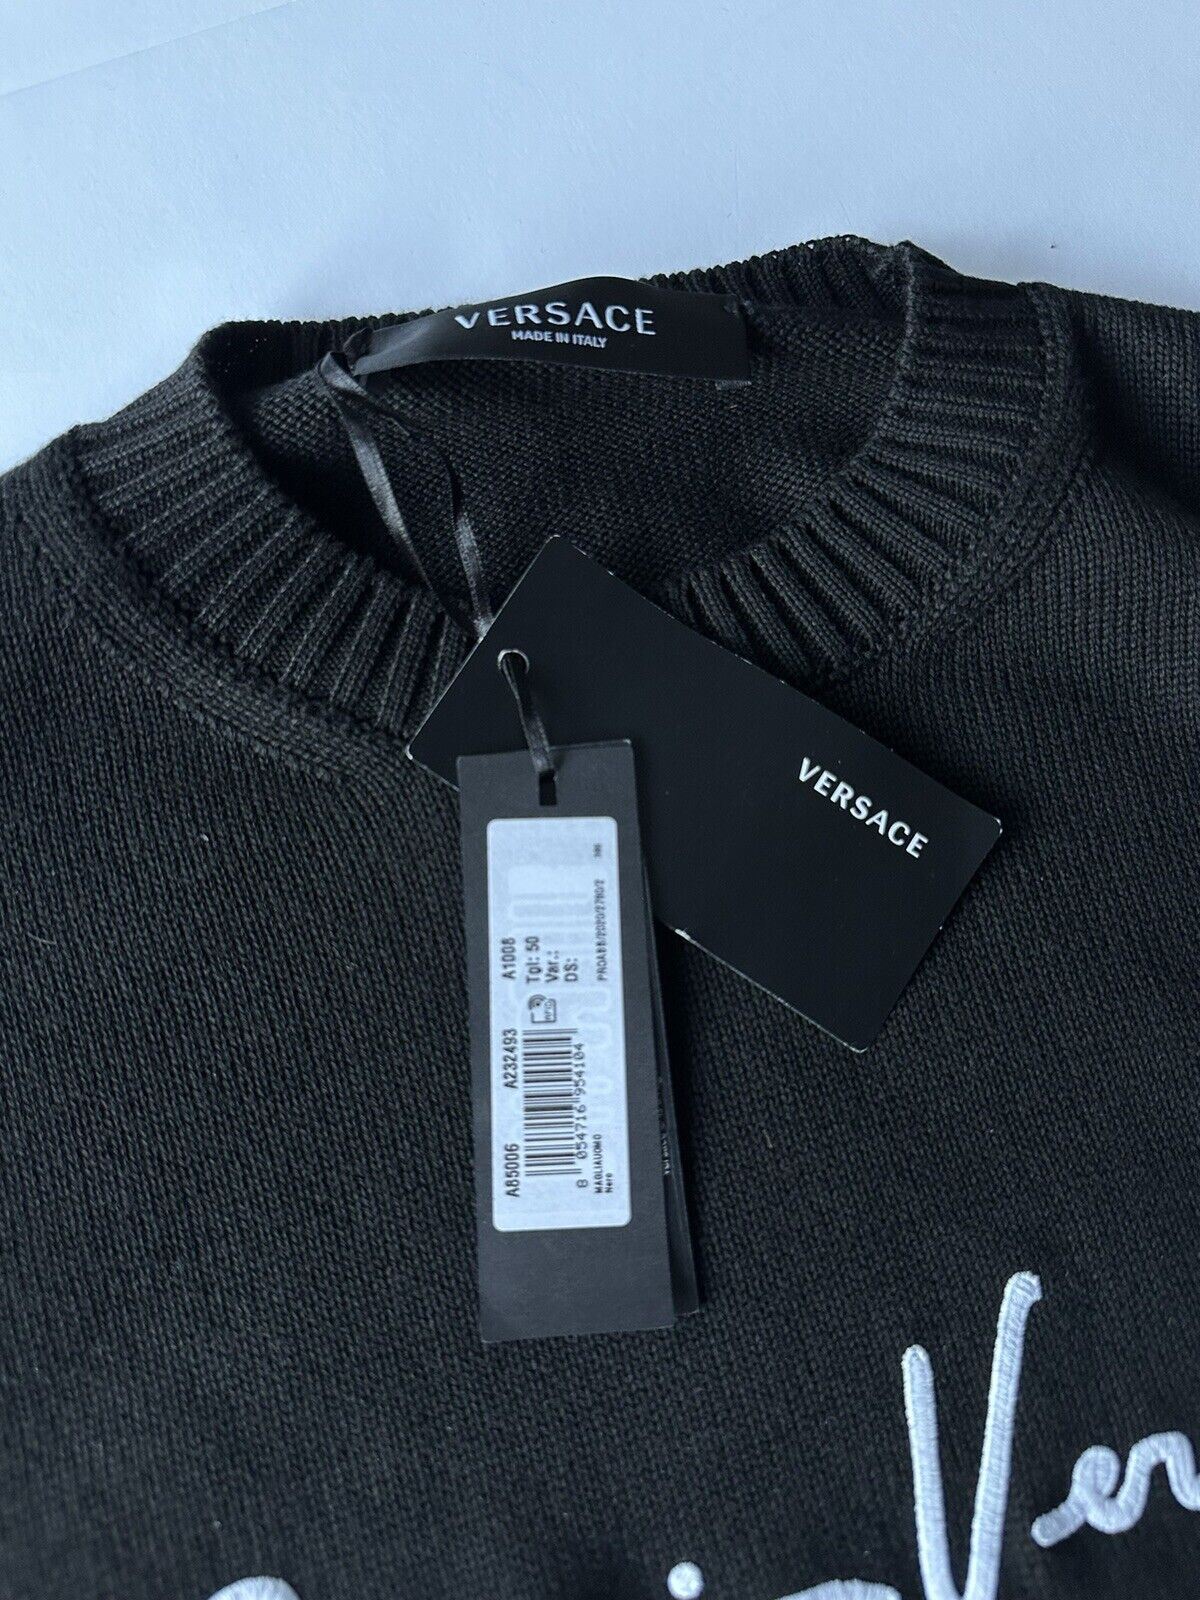 NWT $700 Versace Signature Cotton Knit Sweater Black 50 (Large) Italy A85006